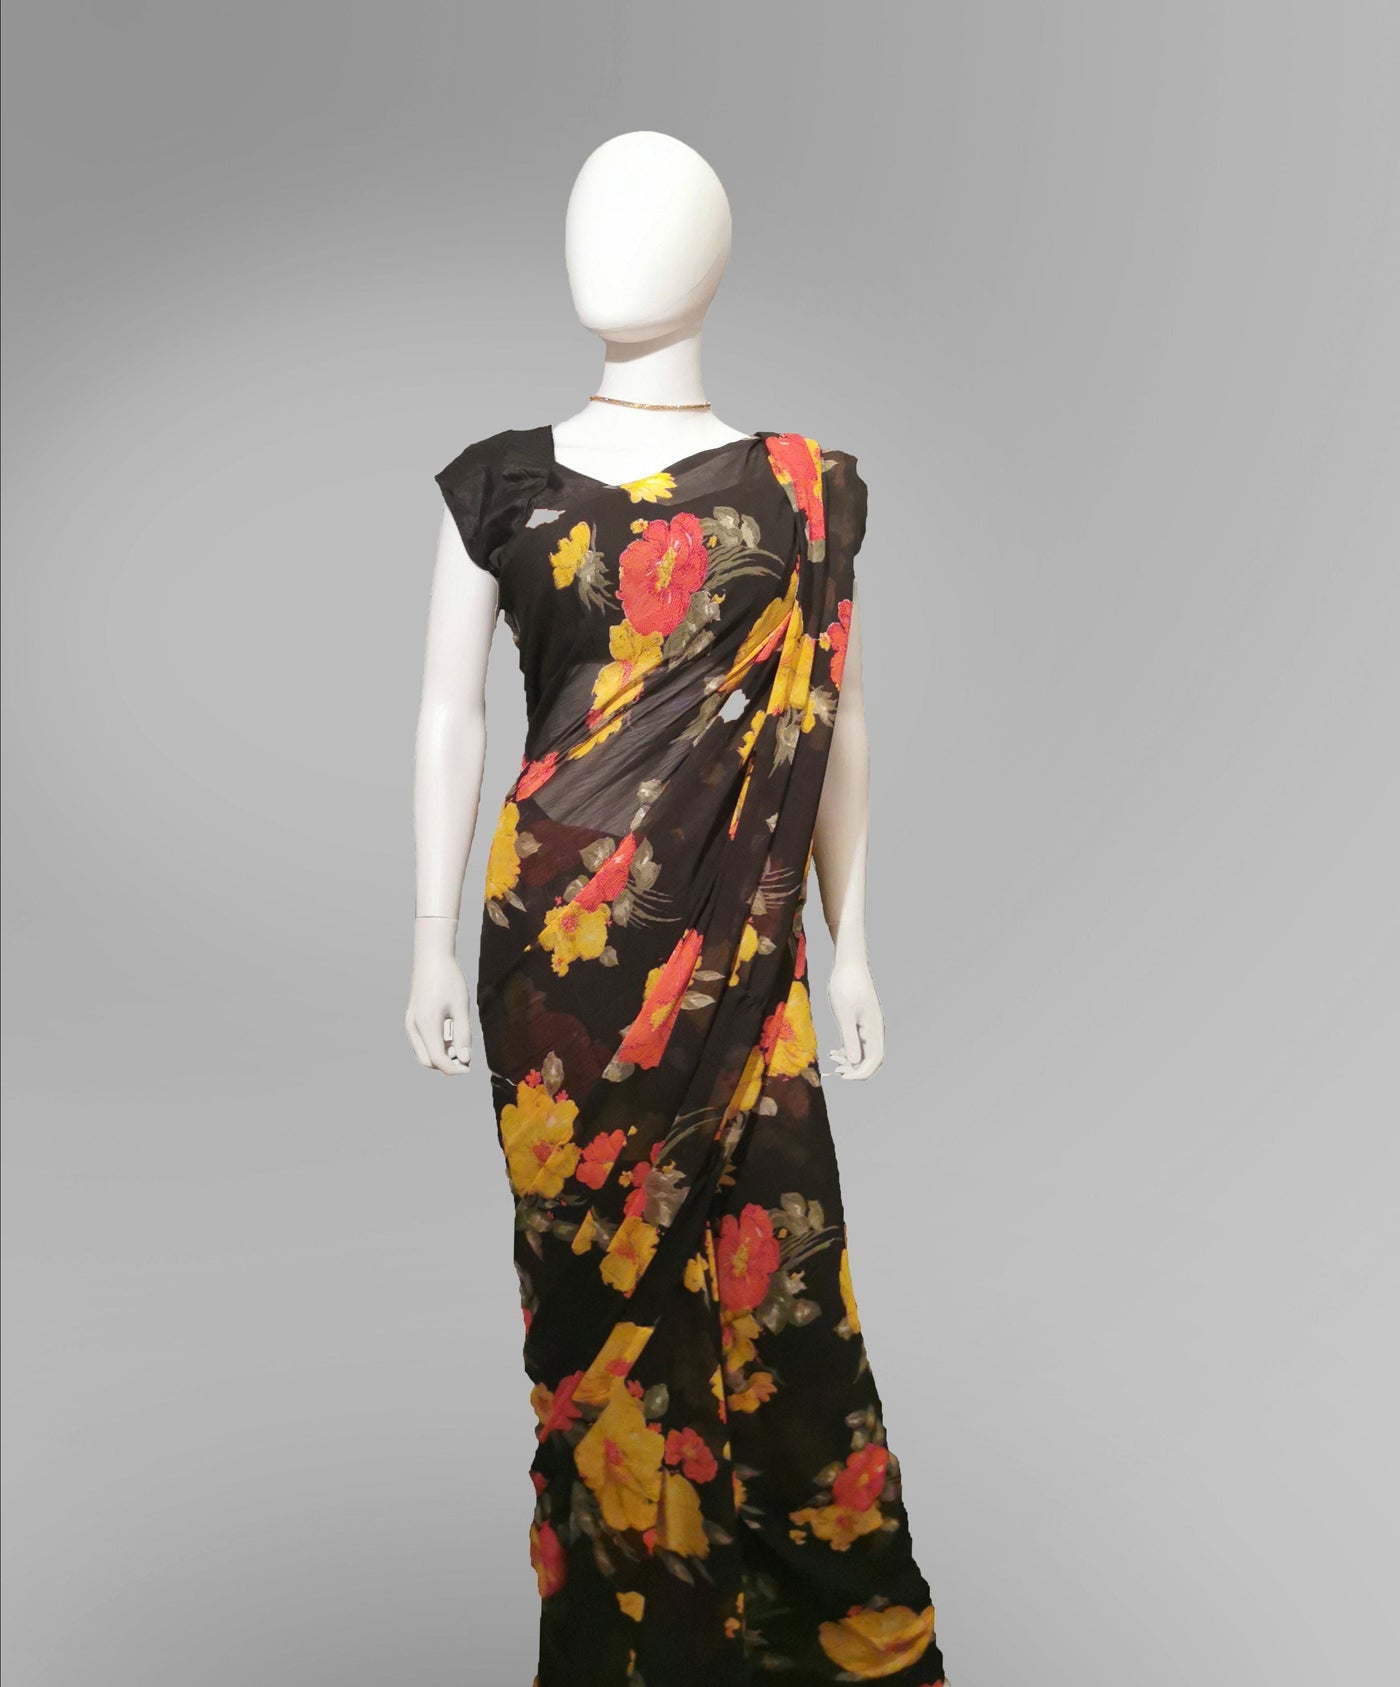 Saree in Black with Autumn Floral Print Indian Clothing in Denver, CO, Aurora, CO, Boulder, CO, Fort Collins, CO, Colorado Springs, CO, Parker, CO, Highlands Ranch, CO, Cherry Creek, CO, Centennial, CO, and Longmont, CO. NATIONWIDE SHIPPING USA- India Fashion X